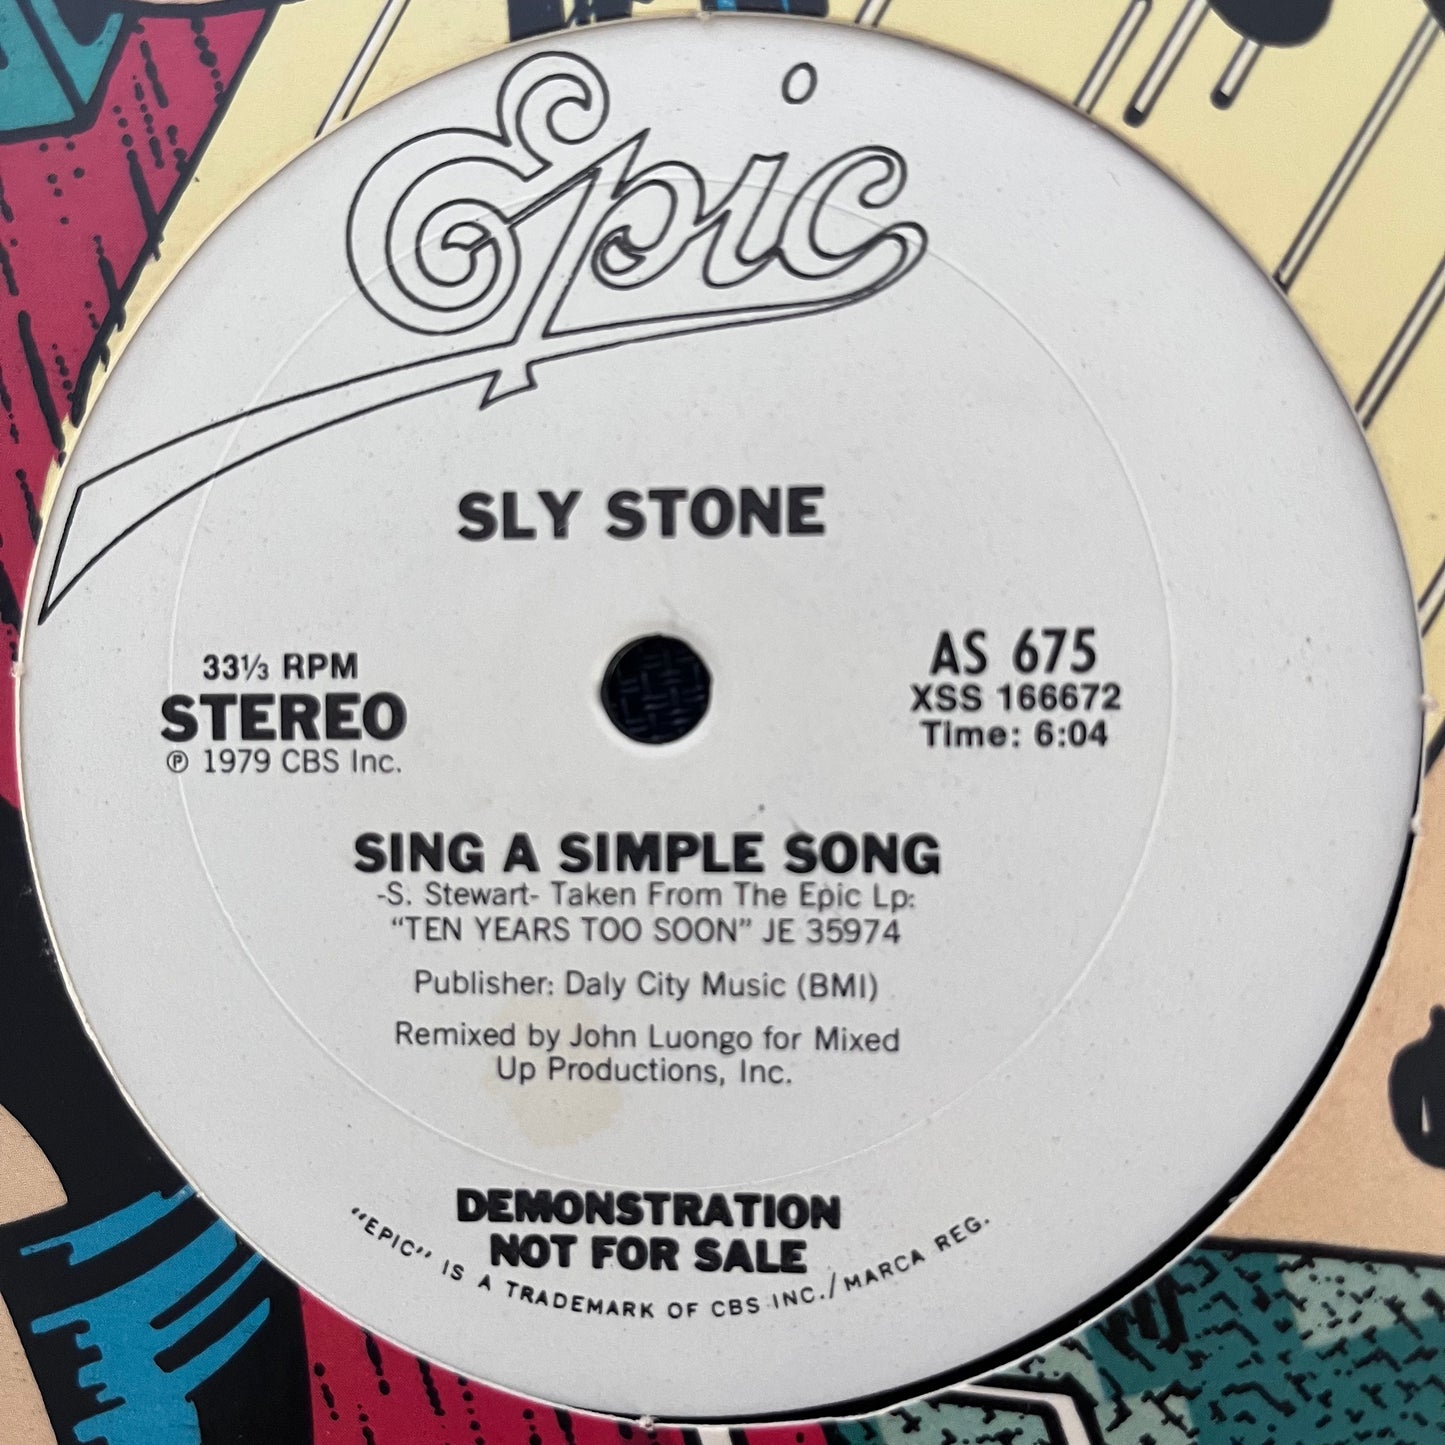 Sly Stone “Dance To The Music” / “Sing A Simple Song” 2 Track 12inch Vinyl Record